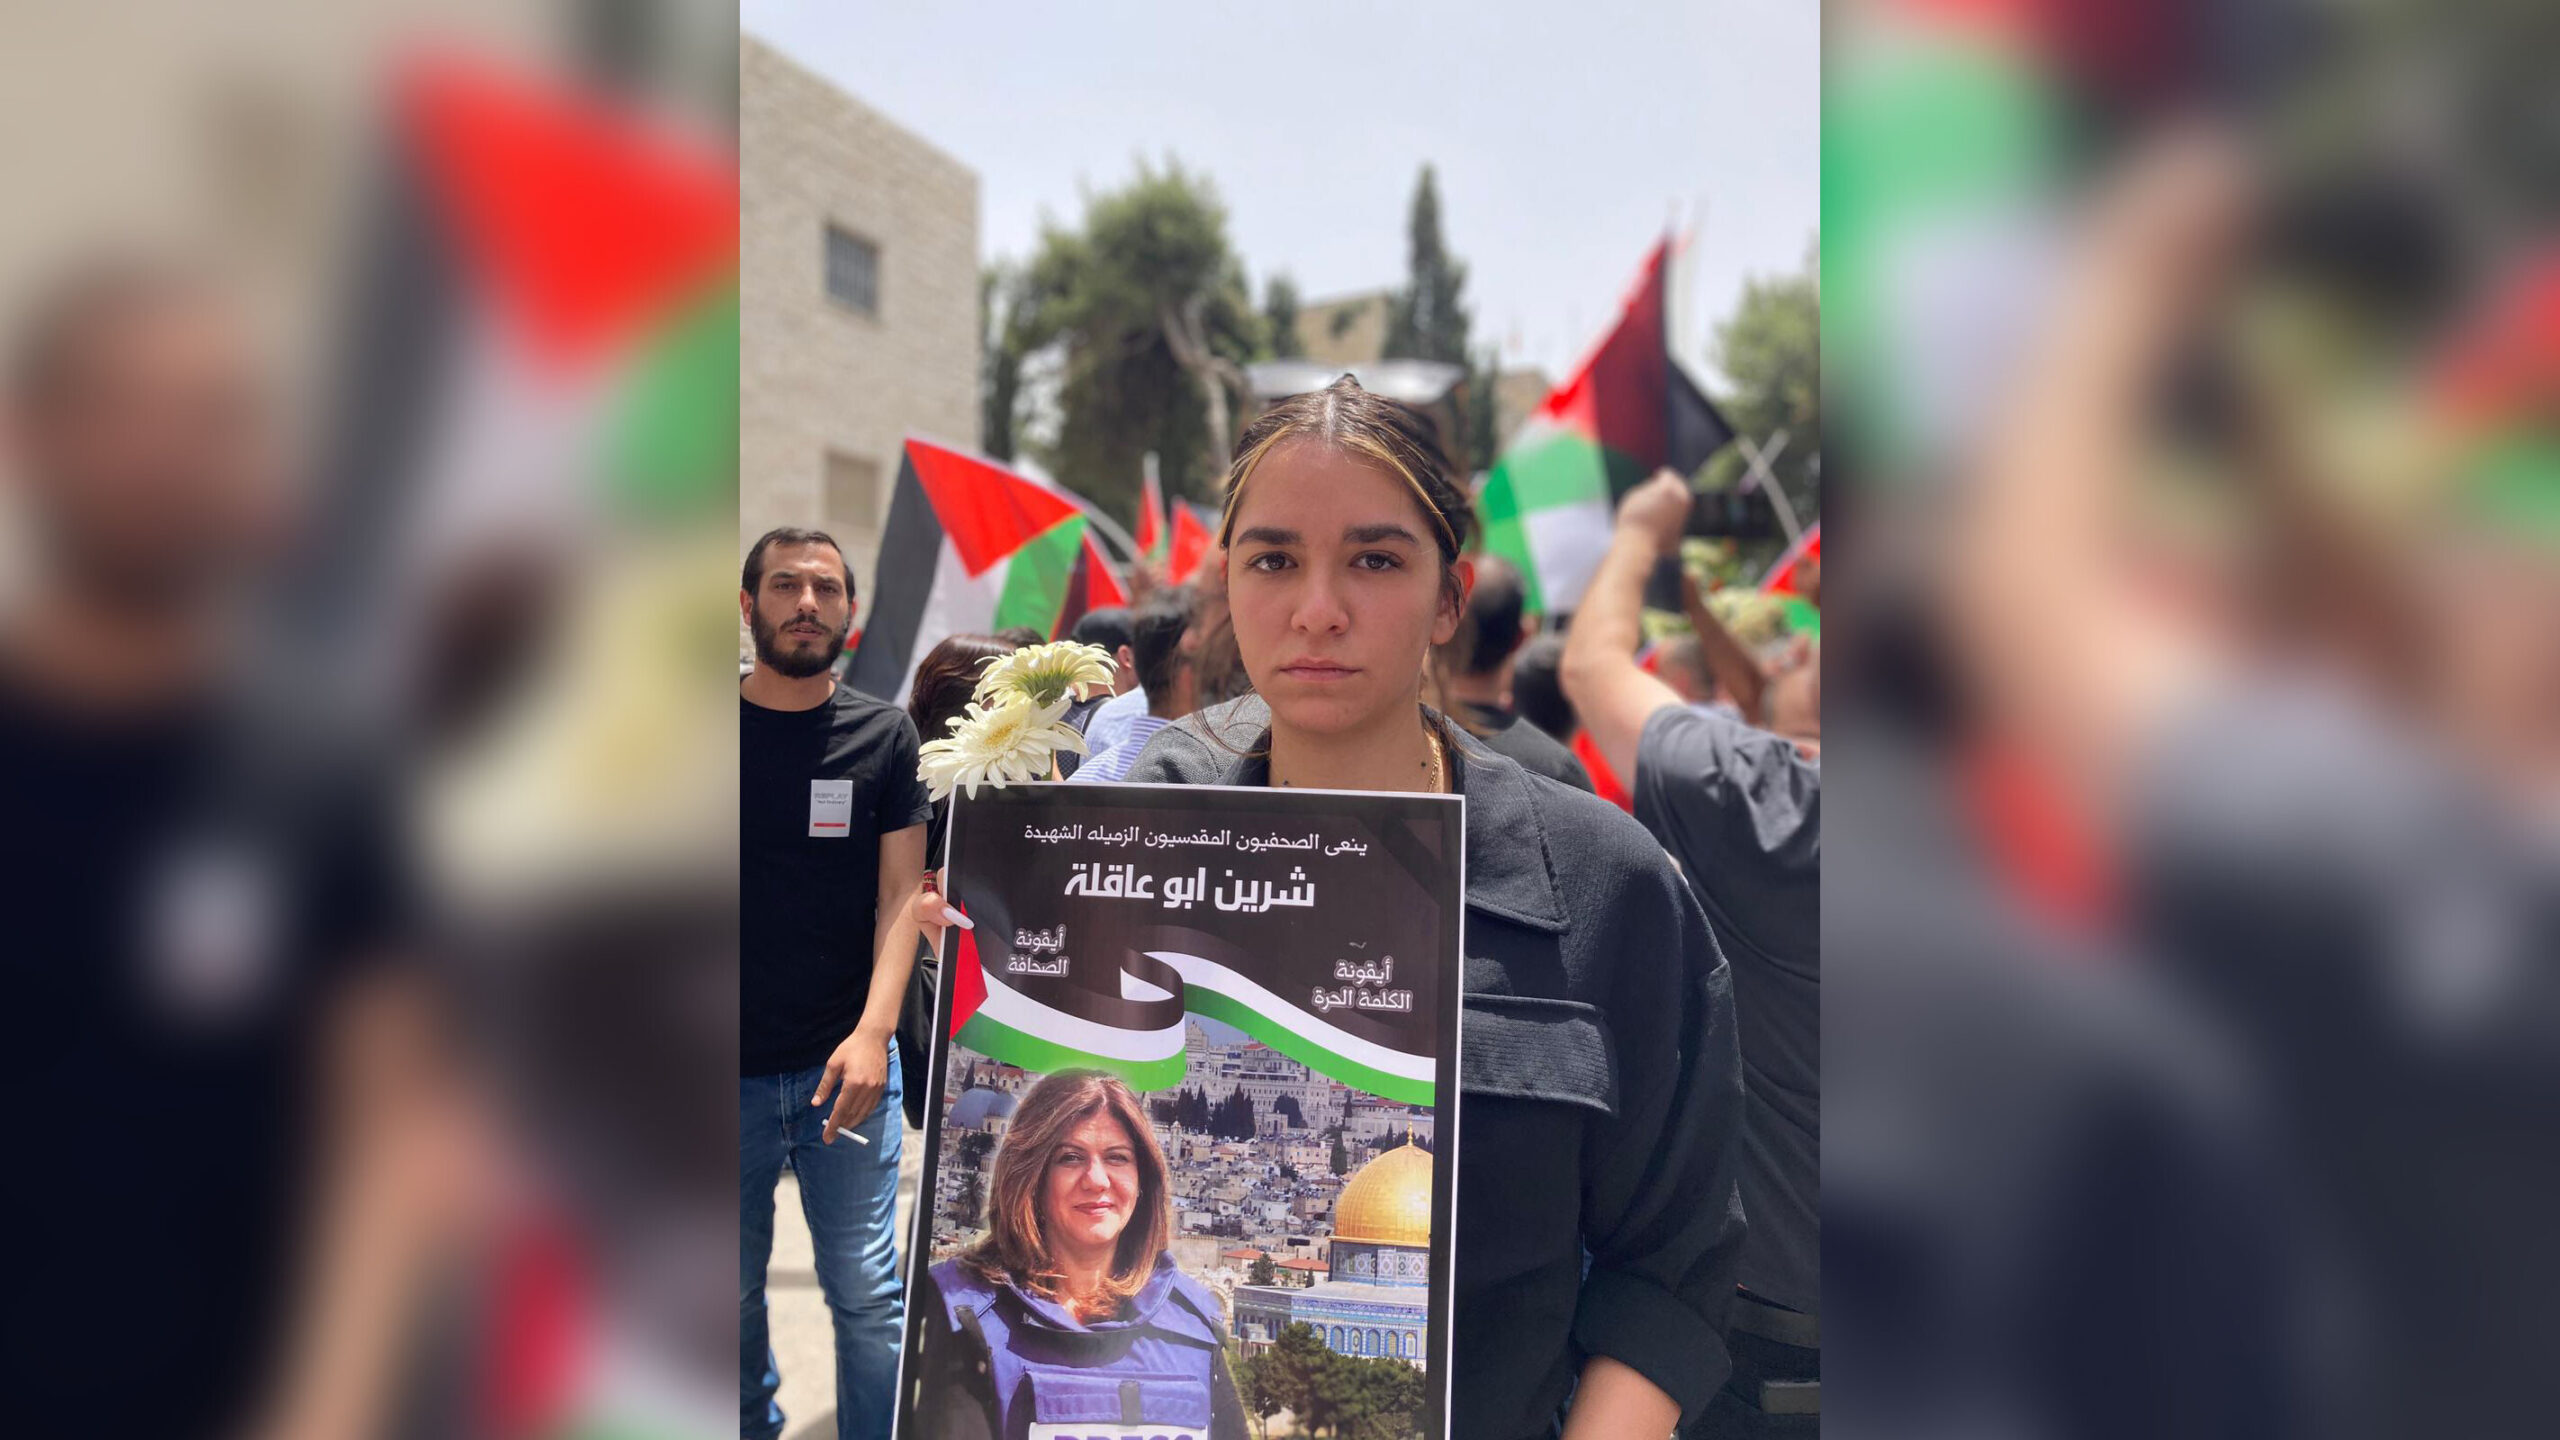 Israeli police will investigate 'events' surrounding funeral of Palestinian journalist: Minister - ABC17NEWS